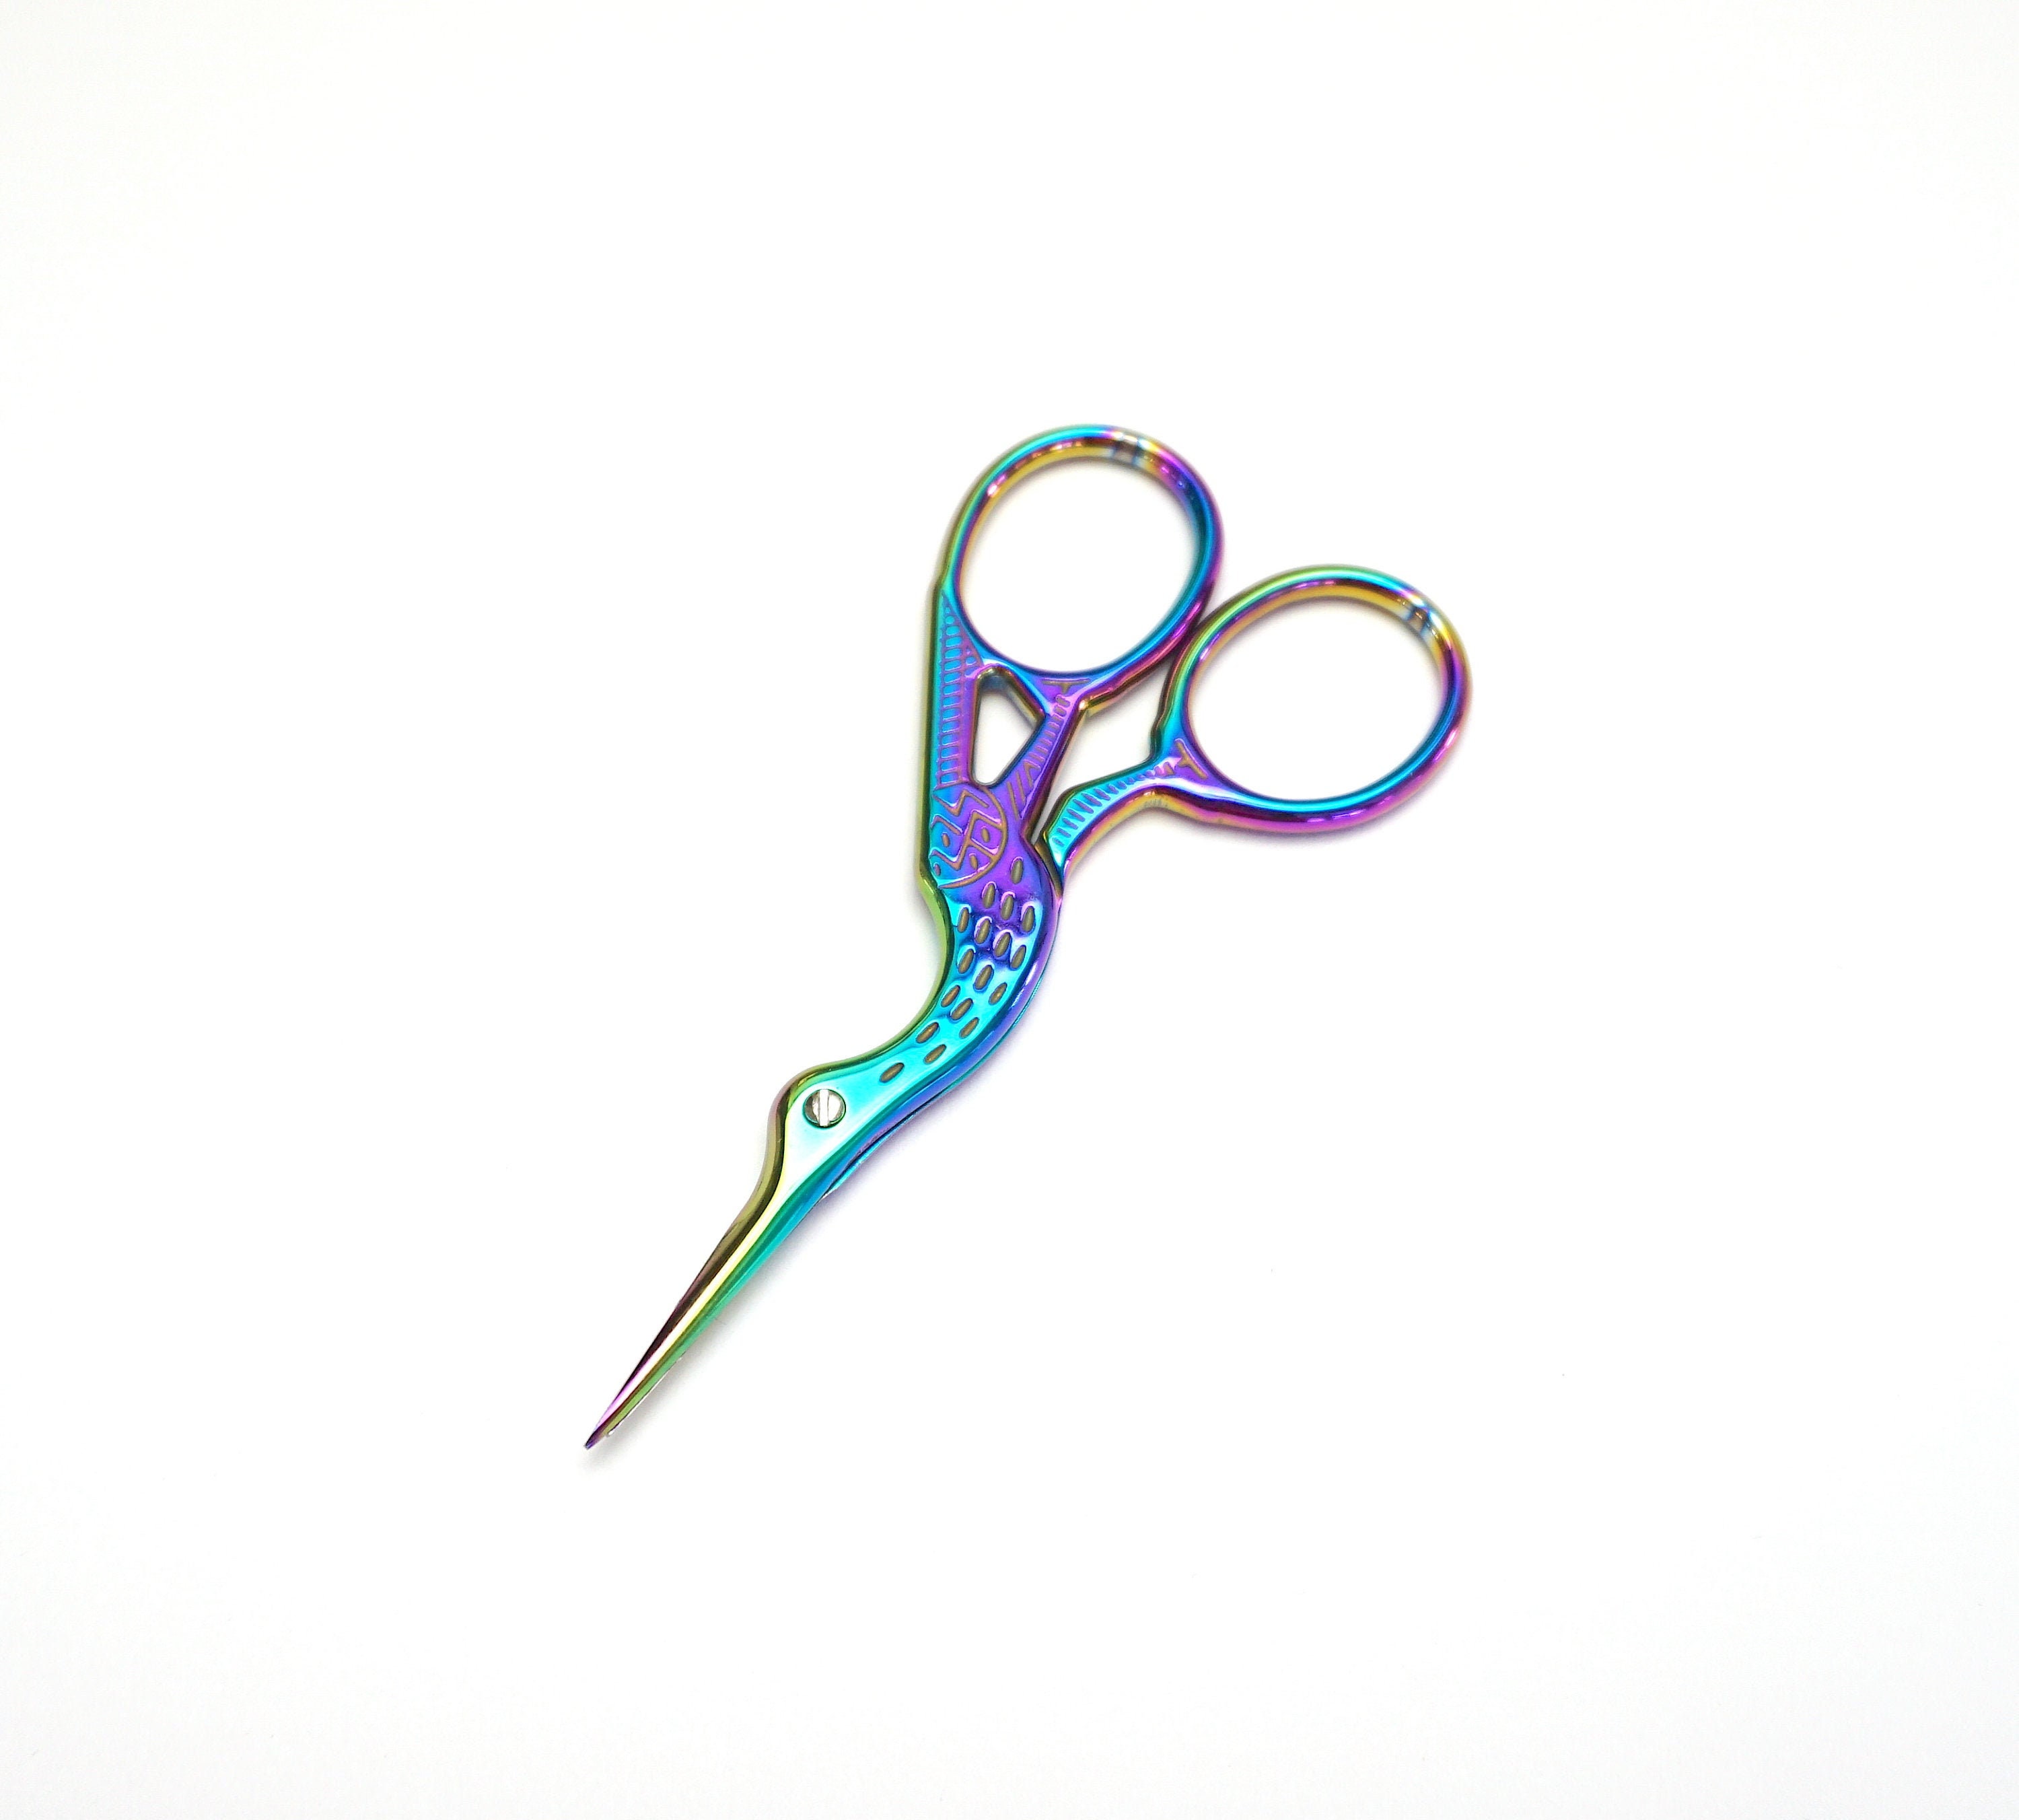 Small Colorful Stork Scissors for Embroidery, Cross Stitch, Rug